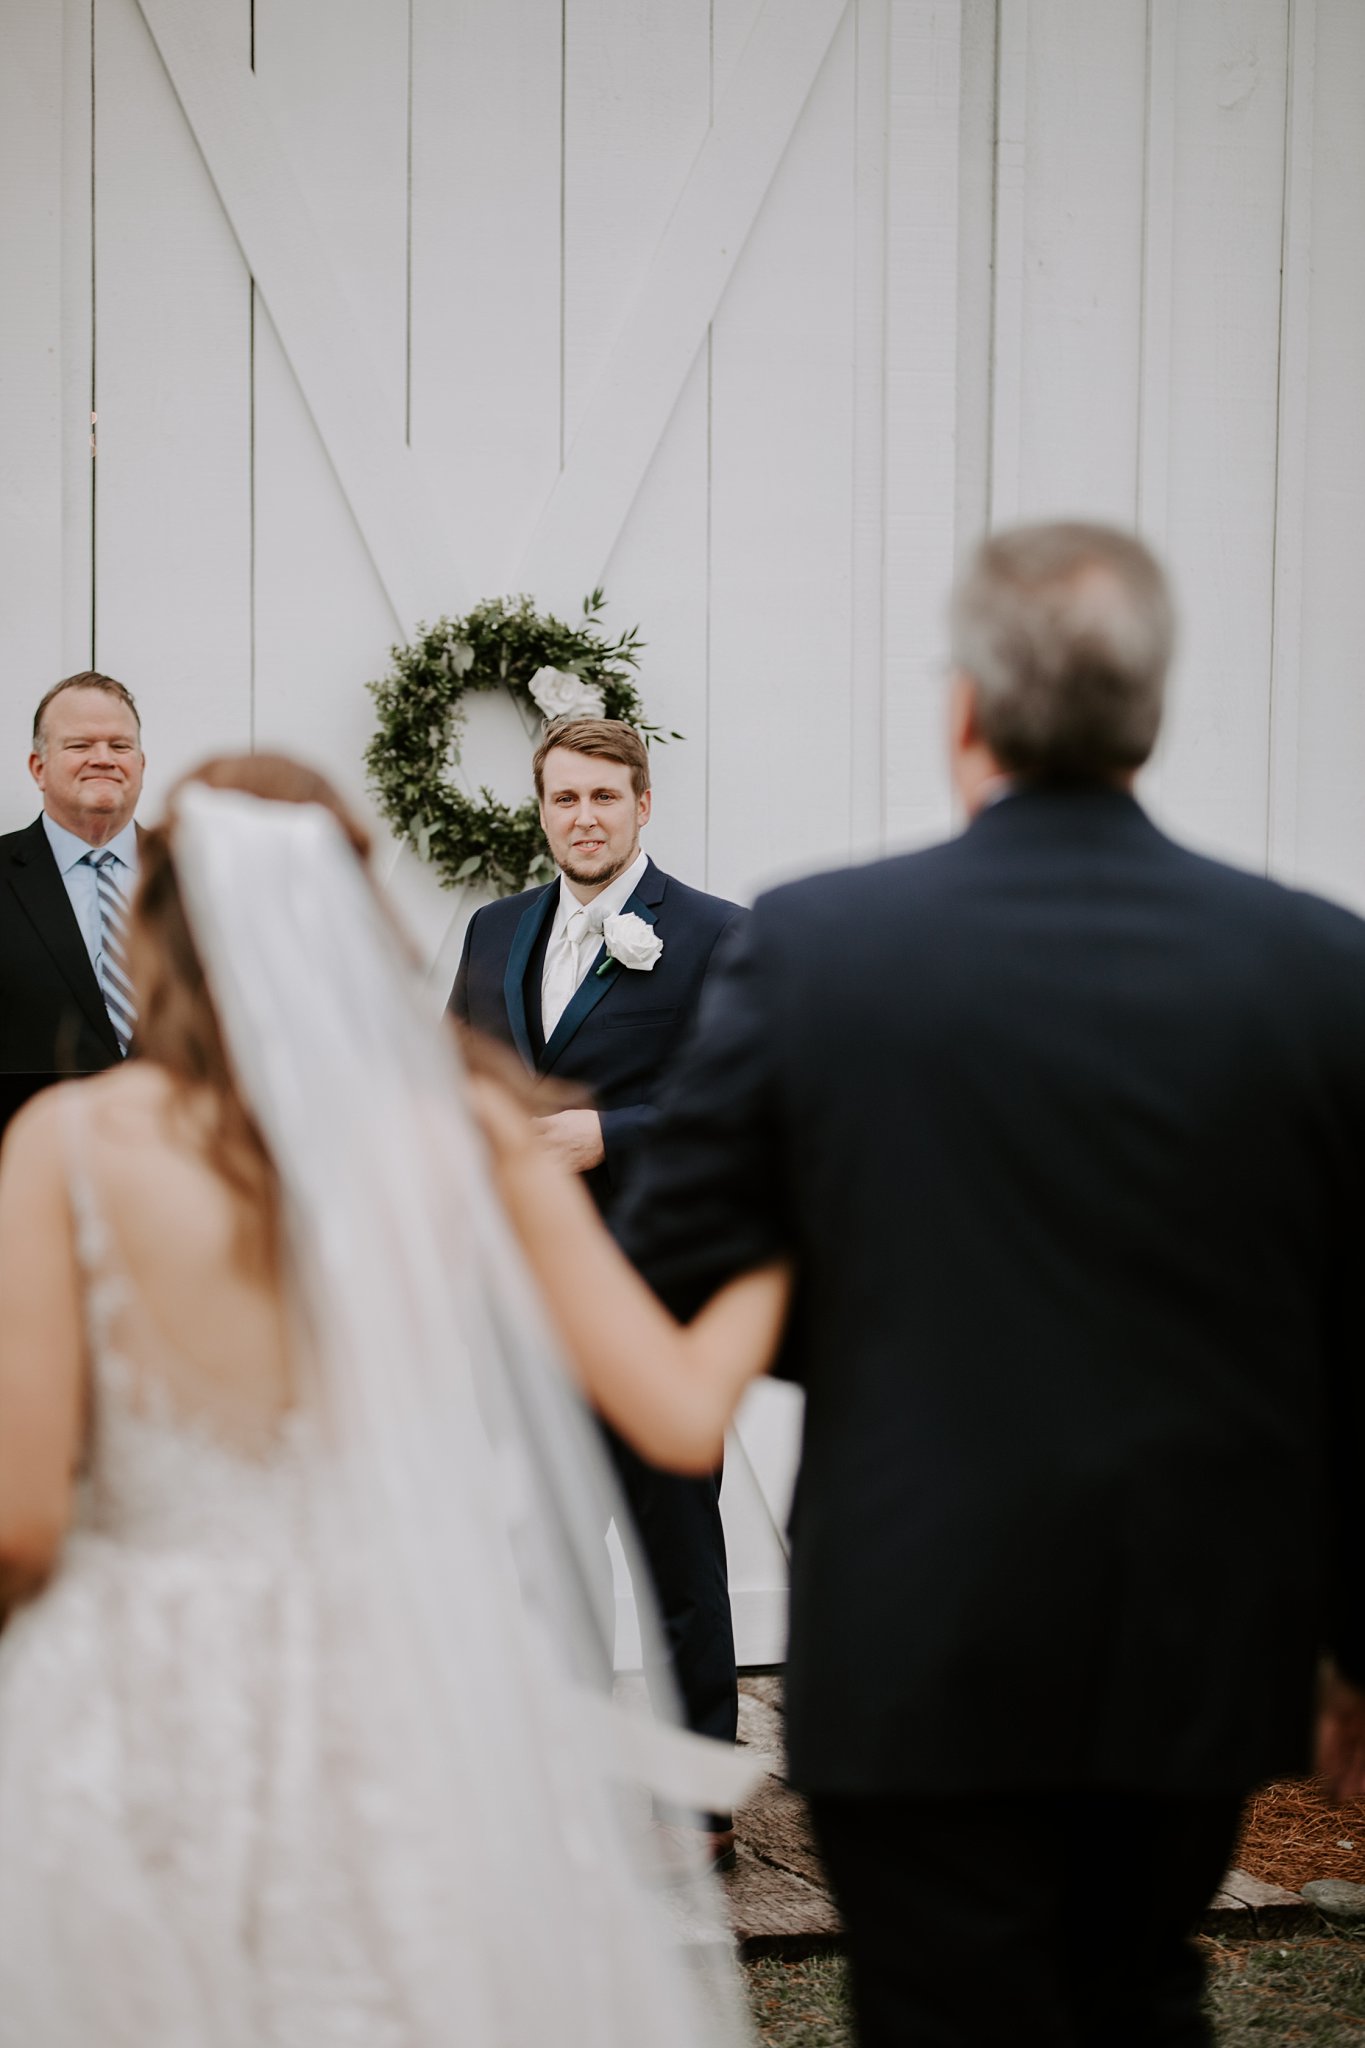 Clifford's smile as he watched Ashley walk towards him during their wedding ceremony at Rosie Creek Farms